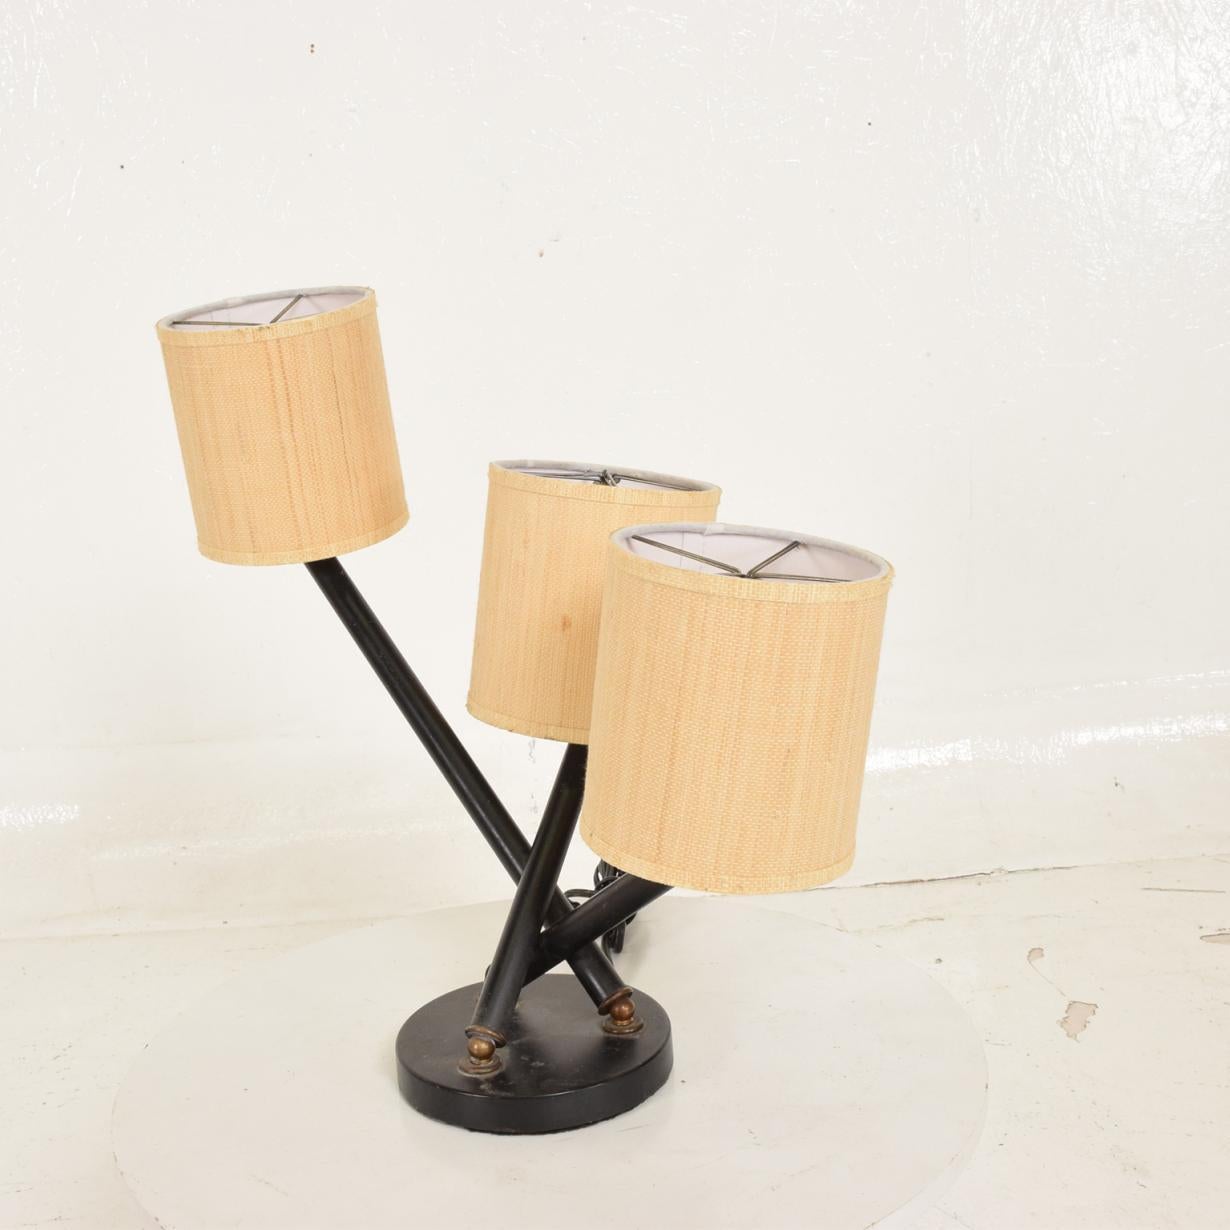 For your consideration a Mid-Century Mexican Modernist tri-arm table lamp with brass accents.

Made in Mexico, circa 1950s. 

Includes, 3 new shades.

Dimensions: 15 1/4